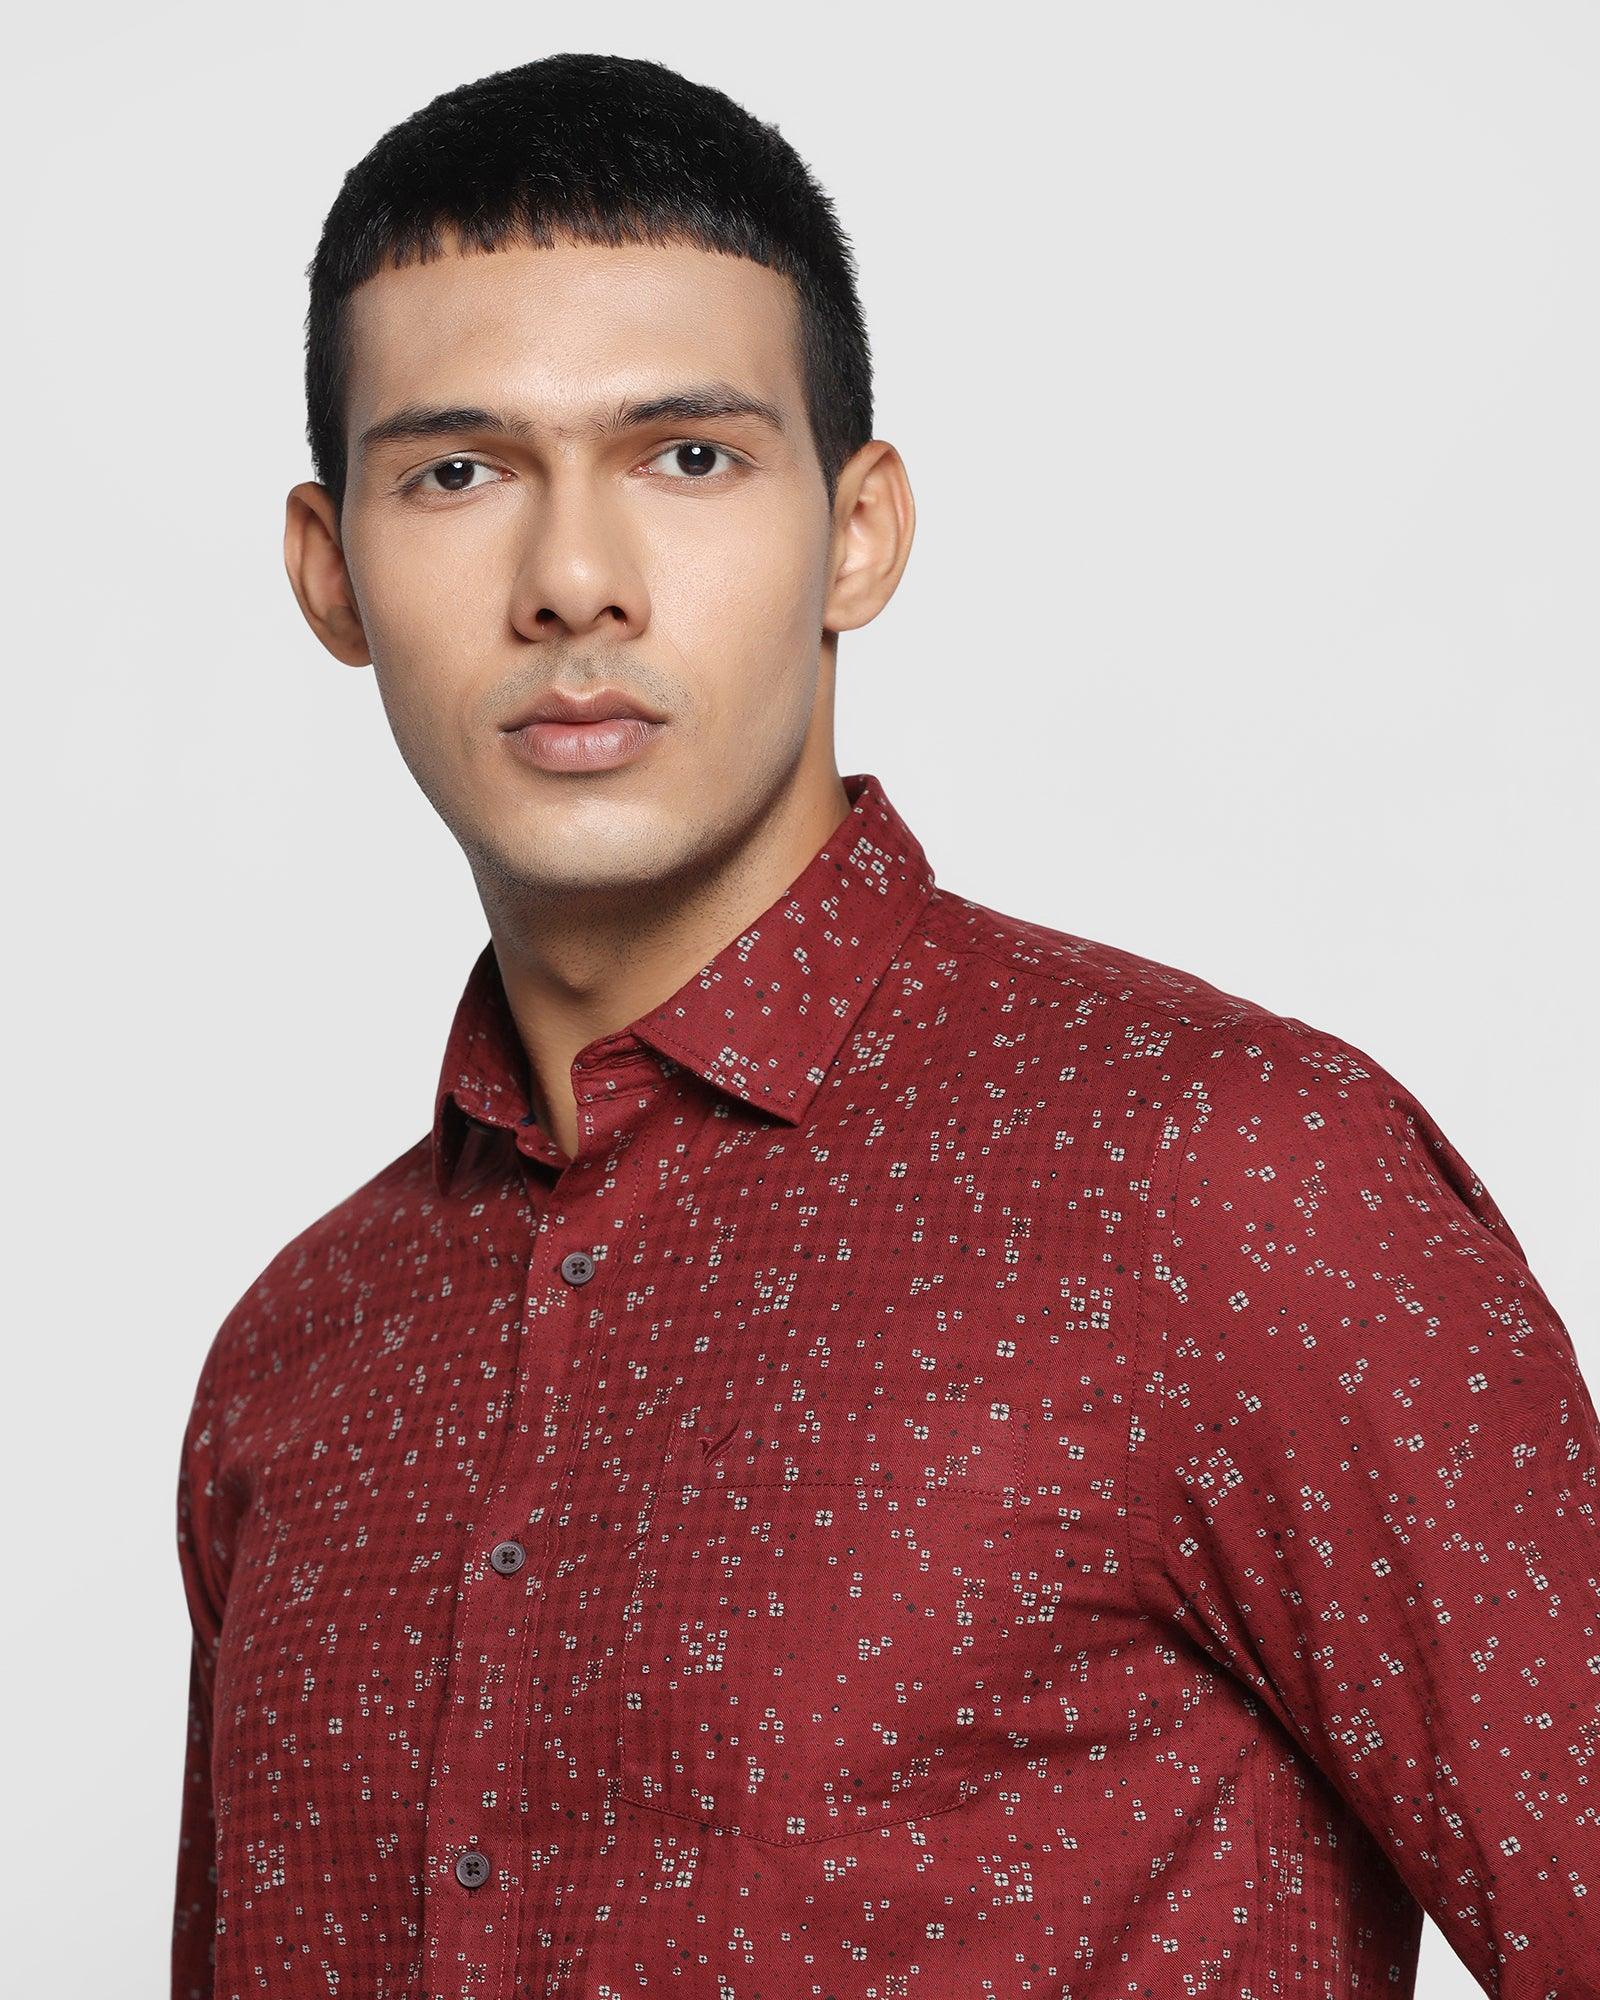 Casual Wine Printed Shirt - Dome